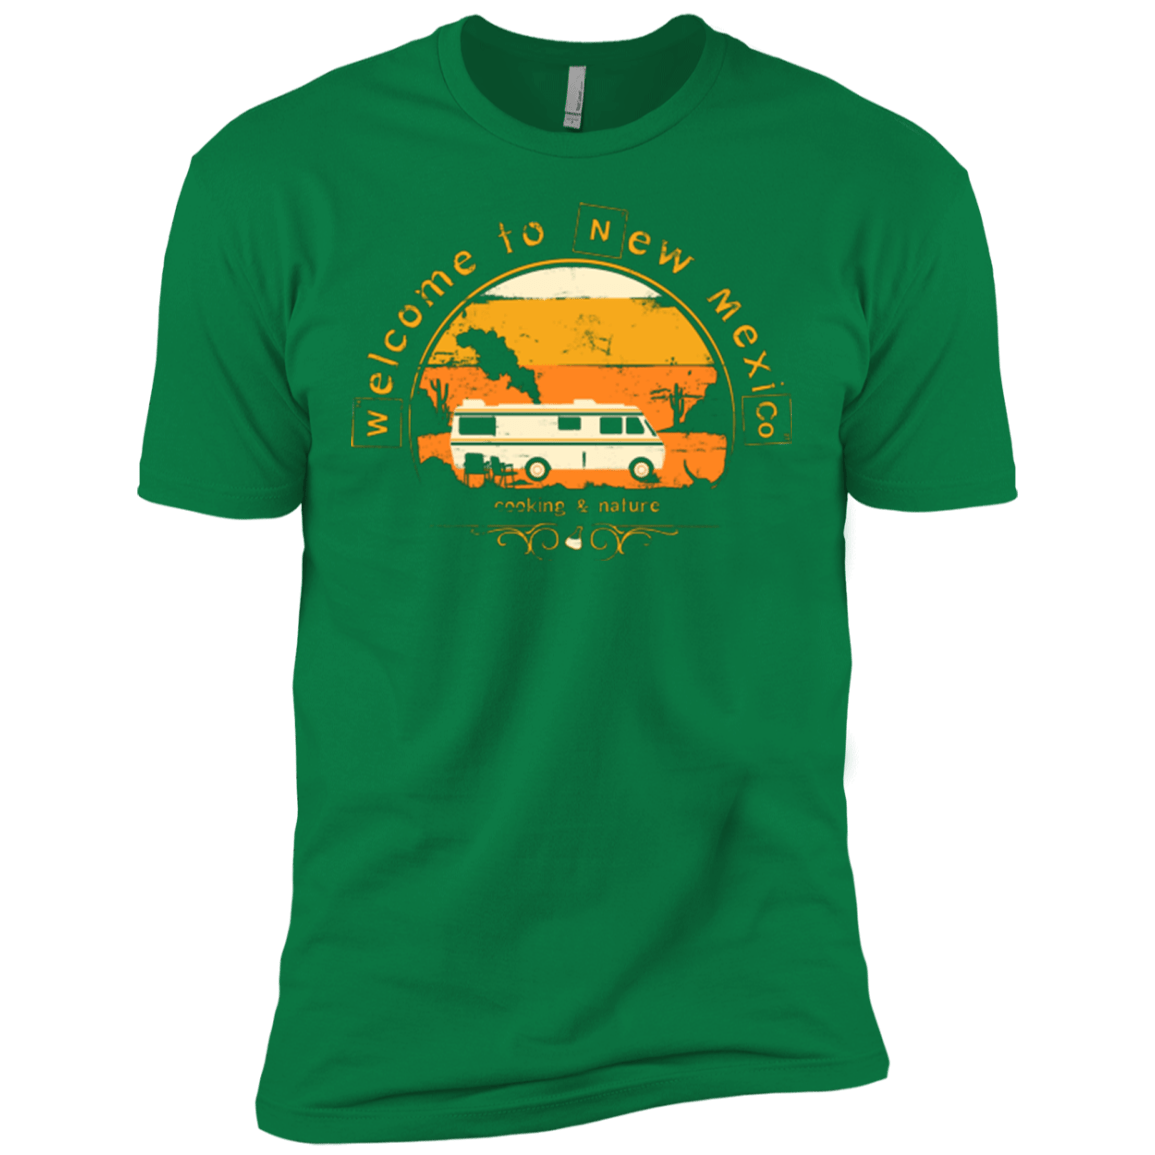 Welcome to New Mexico Men's Premium T-Shirt